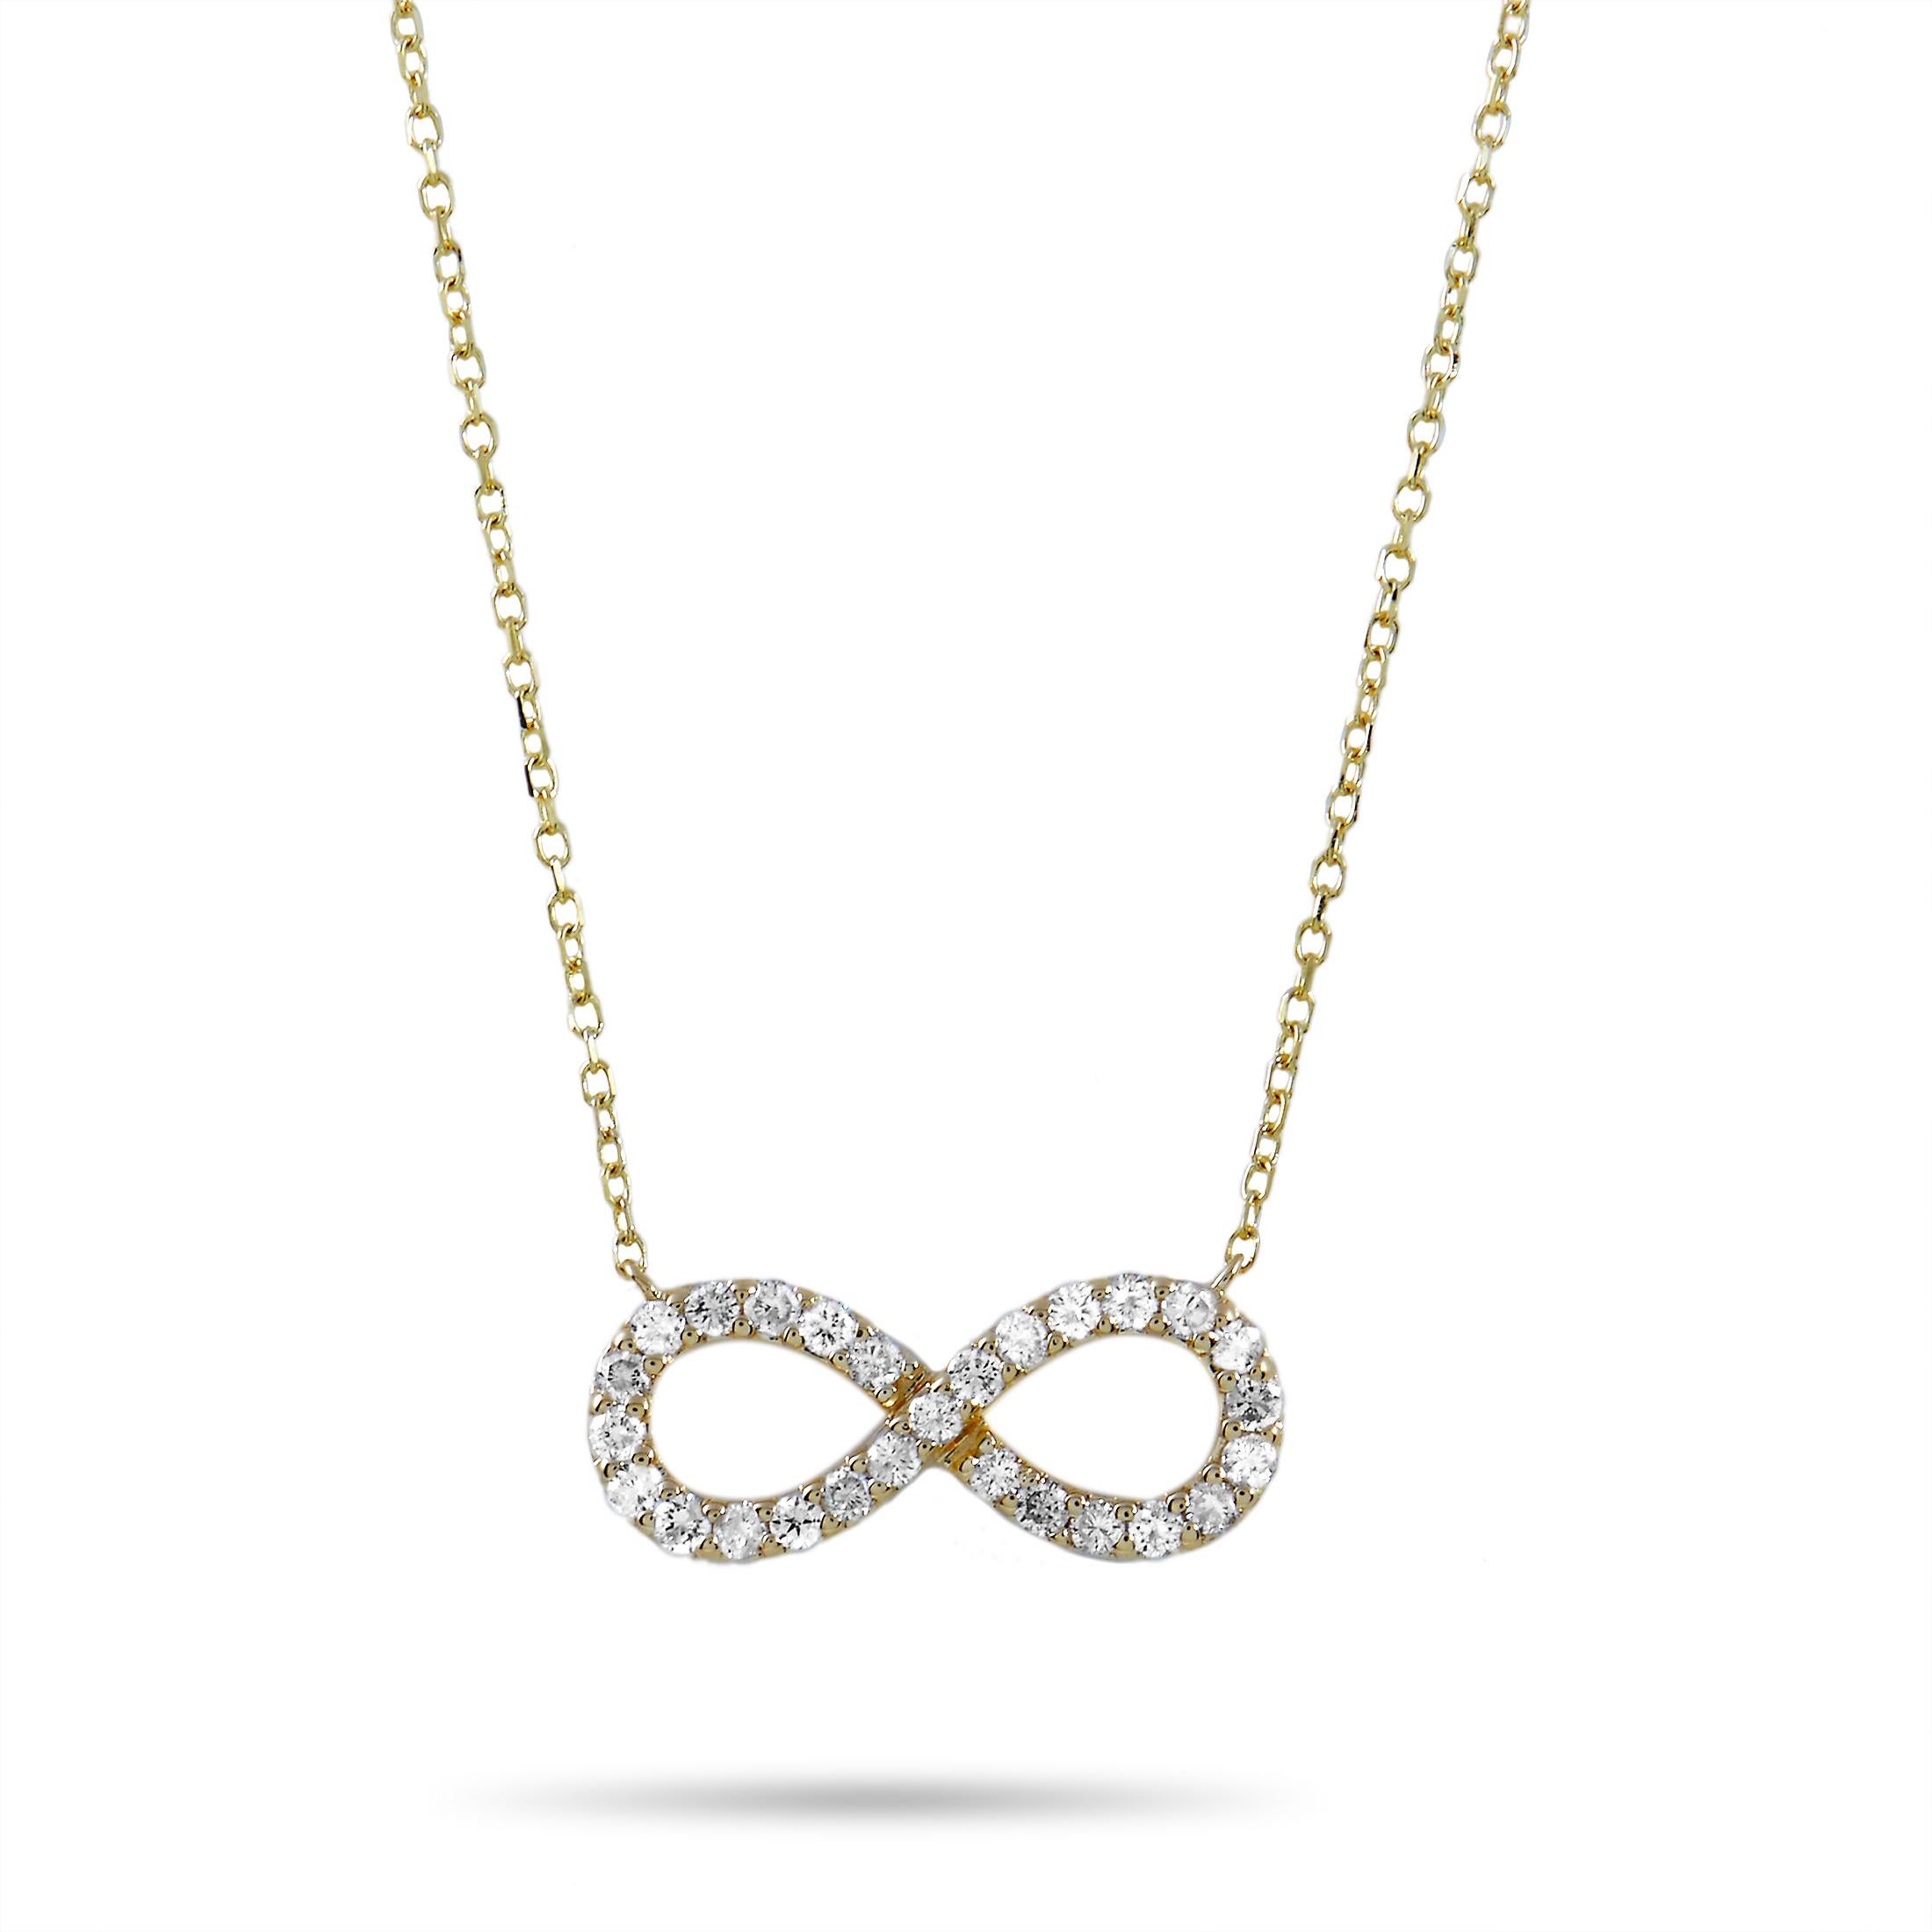 This LB Exclusive necklace is made of 14K yellow gold and embellished with diamonds that amount to 0.30 carats. The necklace weighs 2 grams and boasts a 15” chain and an infinity symbol pendant that measures 0.60” in width.
 
 Offered in brand new